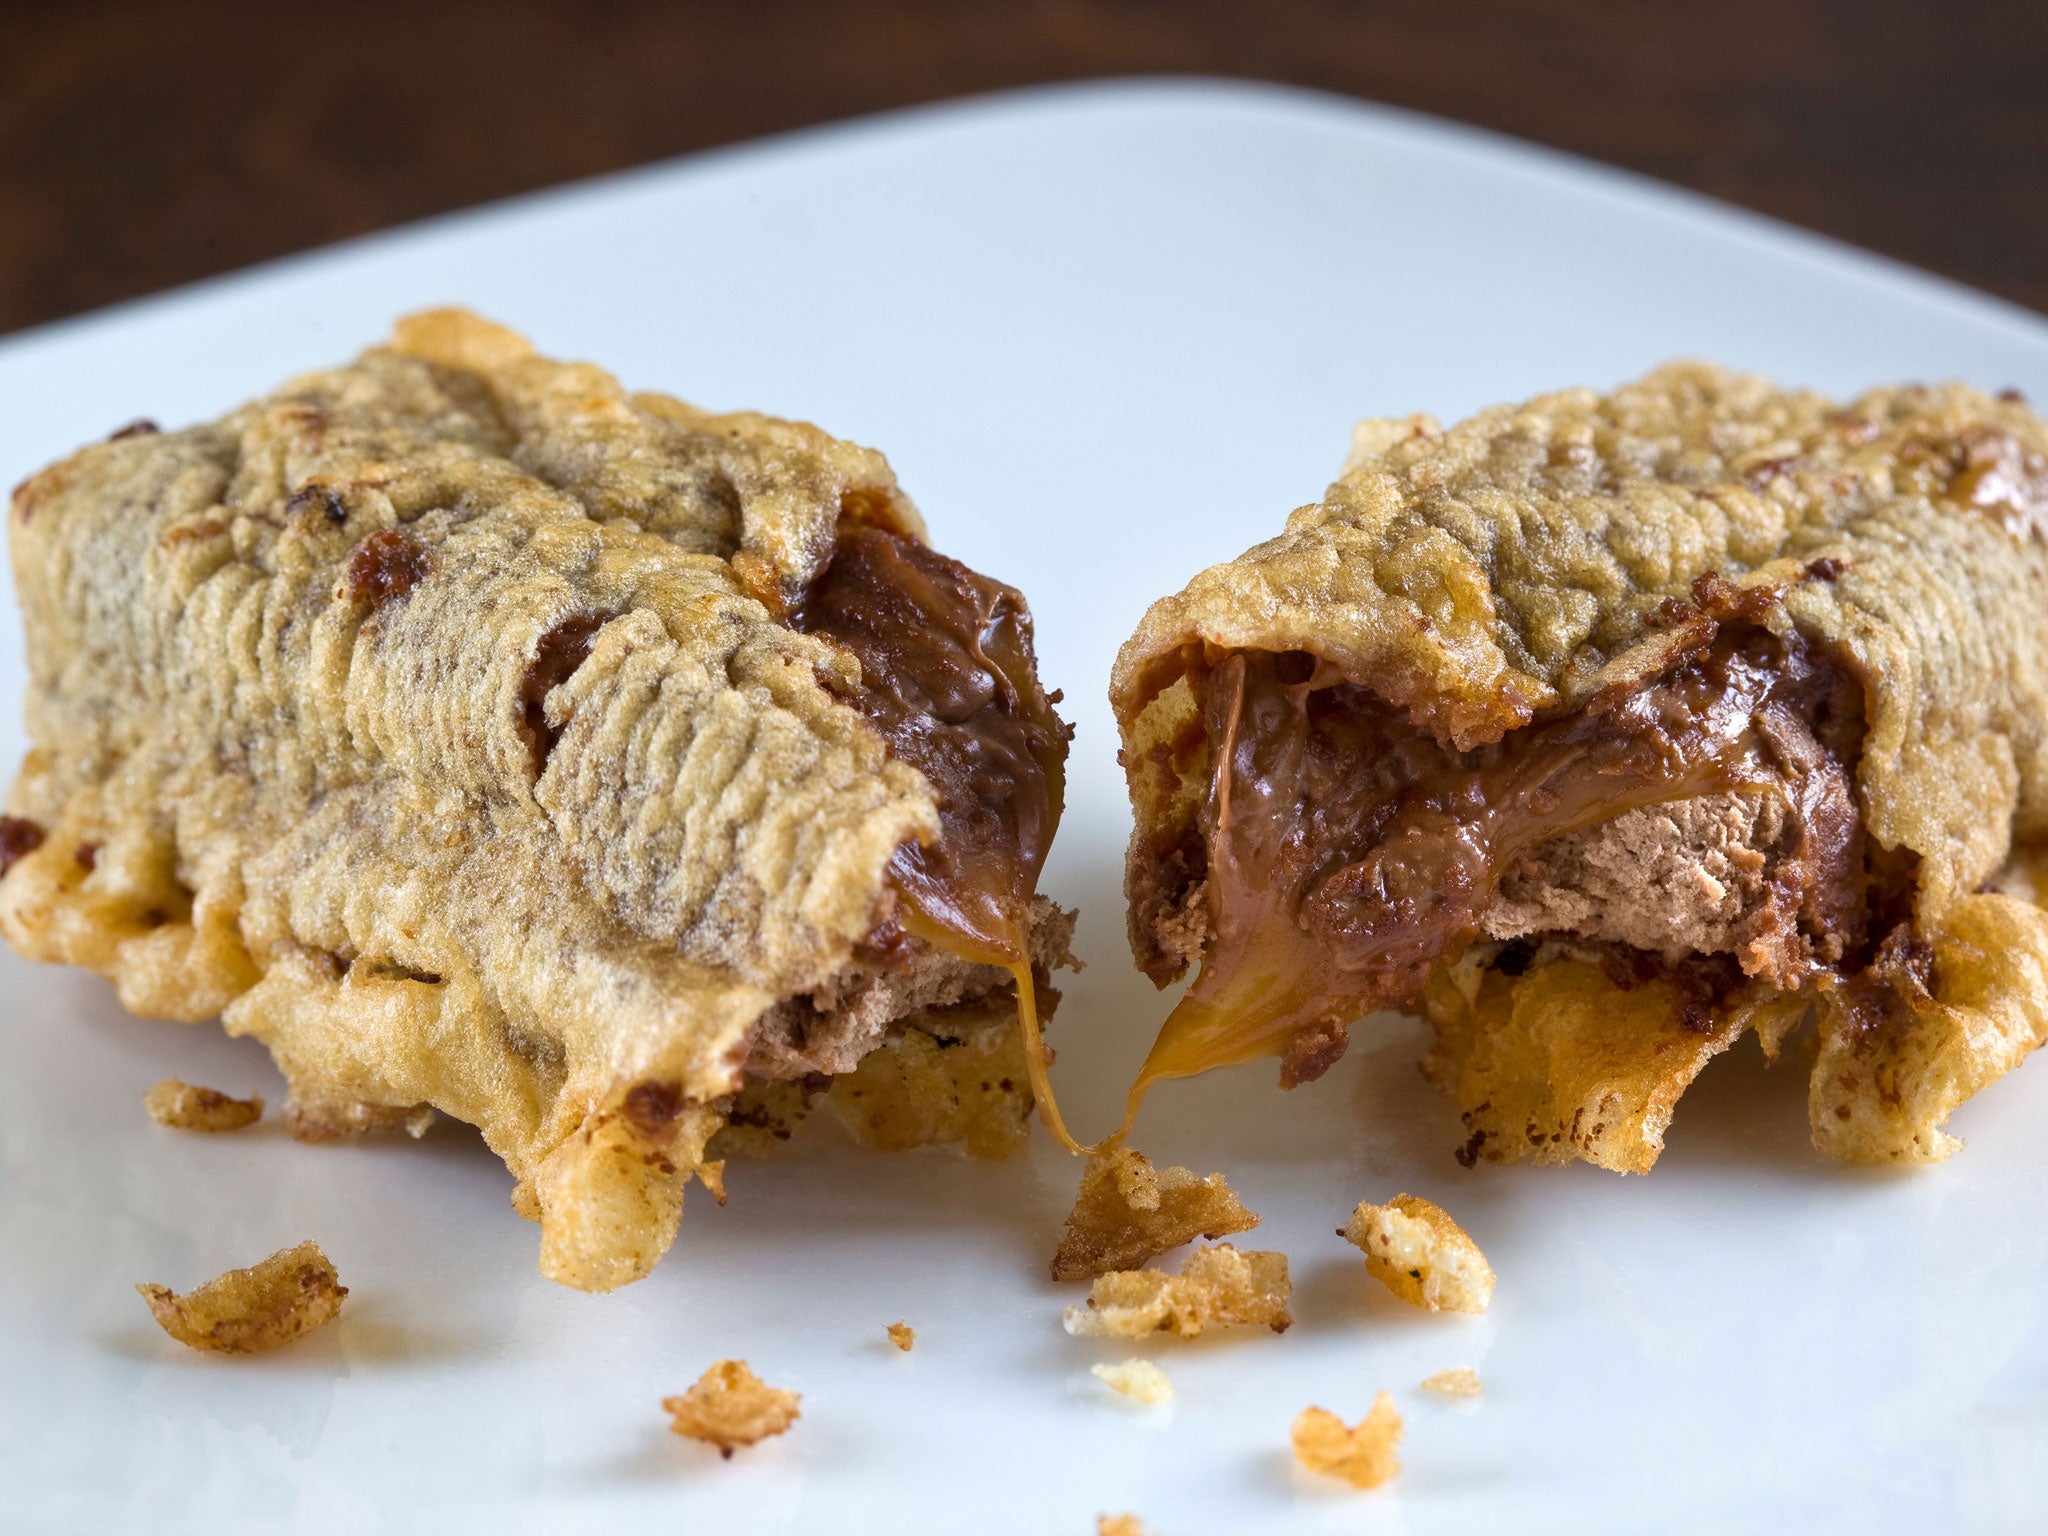 The deep-fried Mars bar was invented in 1995 in Aberdeen